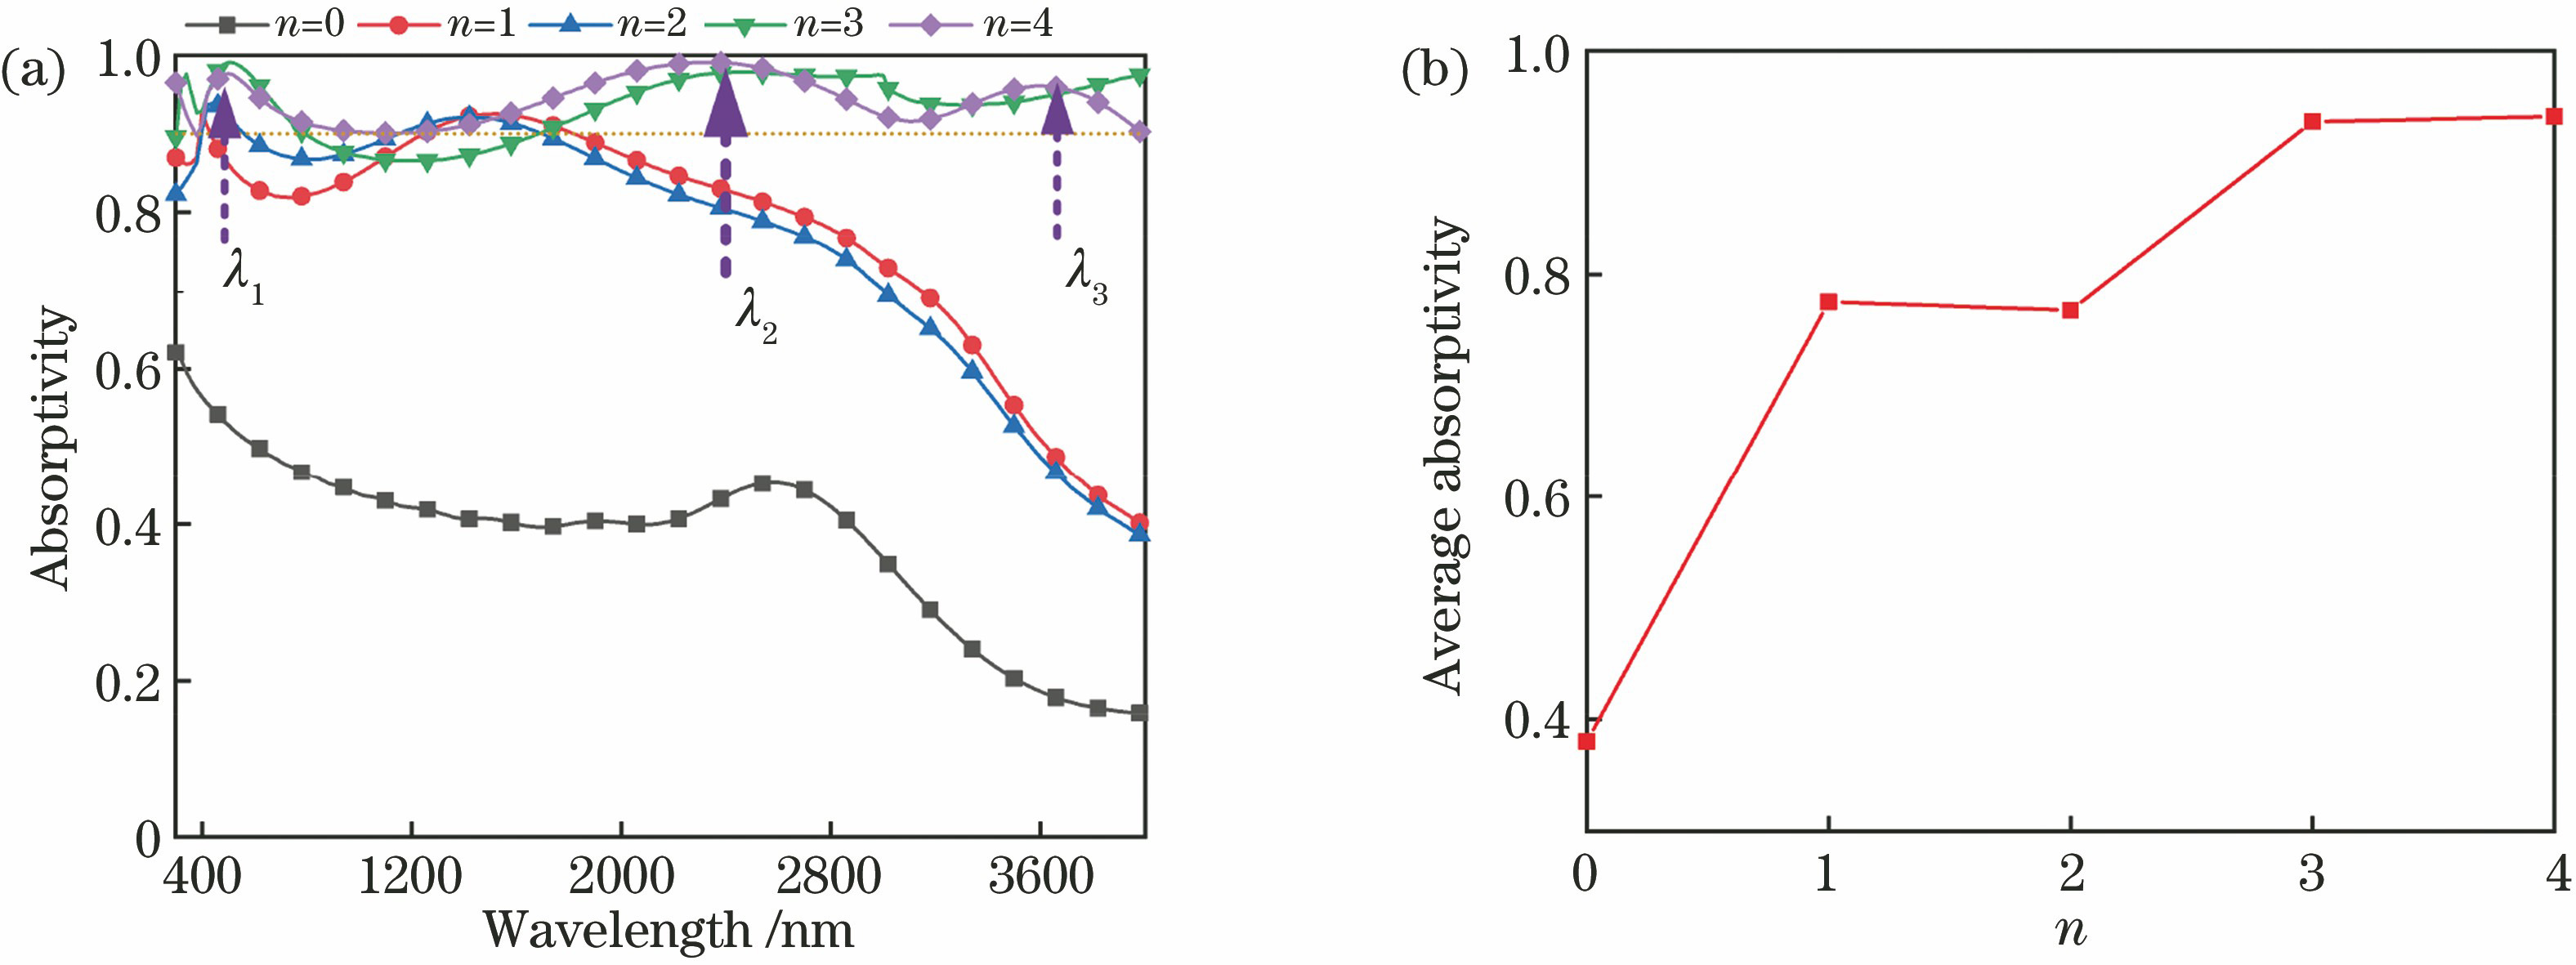 Absorption spectra of multi-layer gear-shaped metamaterial absorber and average absorptivity versus layer number. (a) Absorption spectra; (b) average absorptivity versus layer number